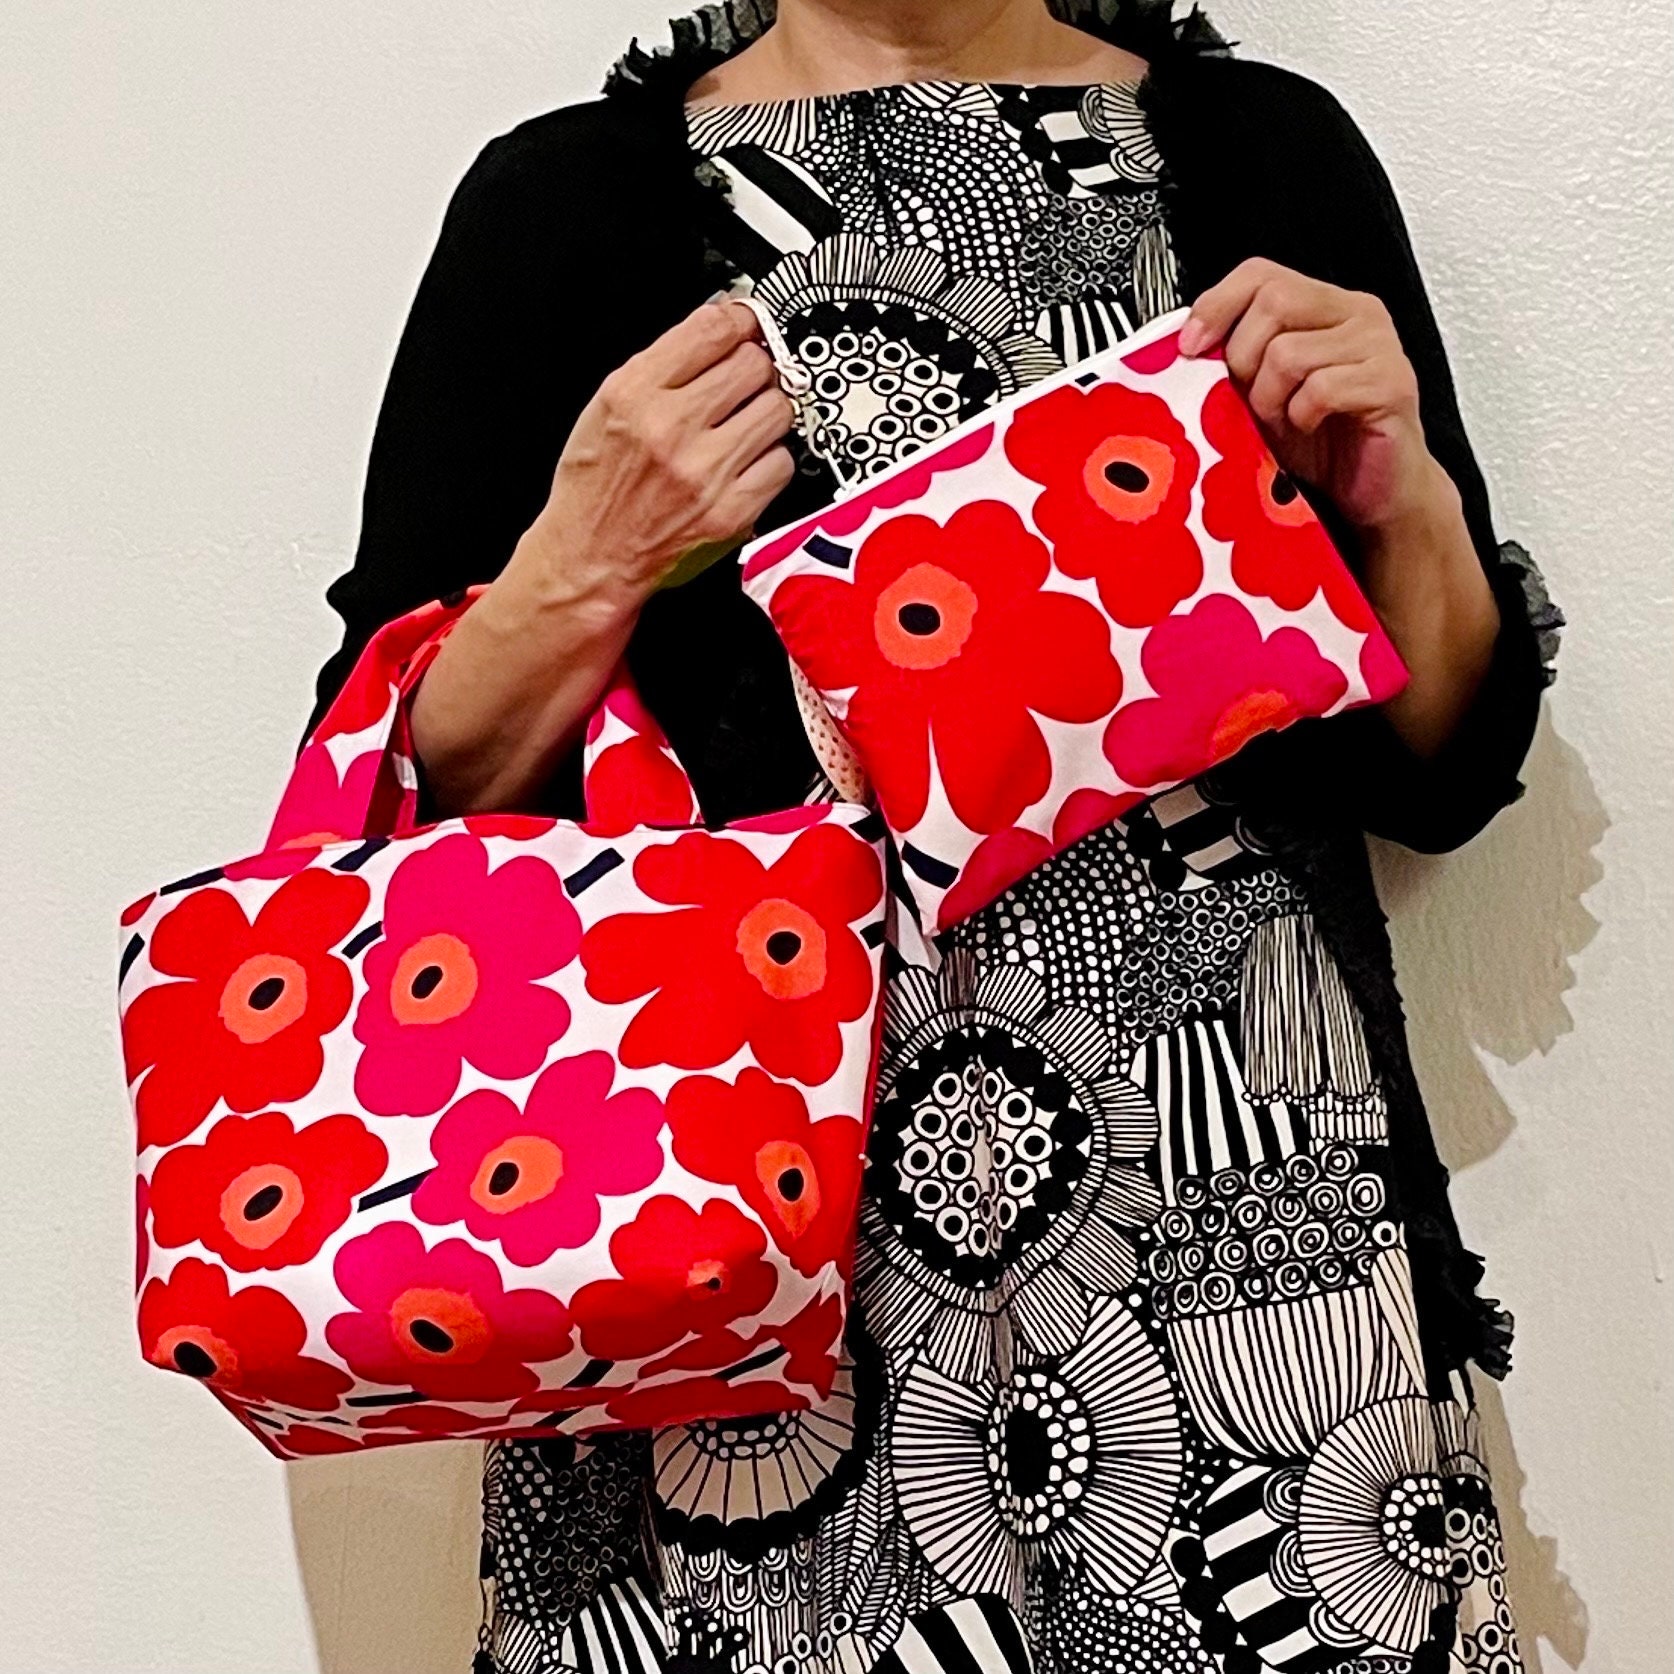 Marimekko Bag With a Detachable Zipper Pouch, Marimekko Unikko Bag,  Marimekko Small Tote. Marimekko Mini Tote Bag. Red and Pink Flower Bag, -  Etsy